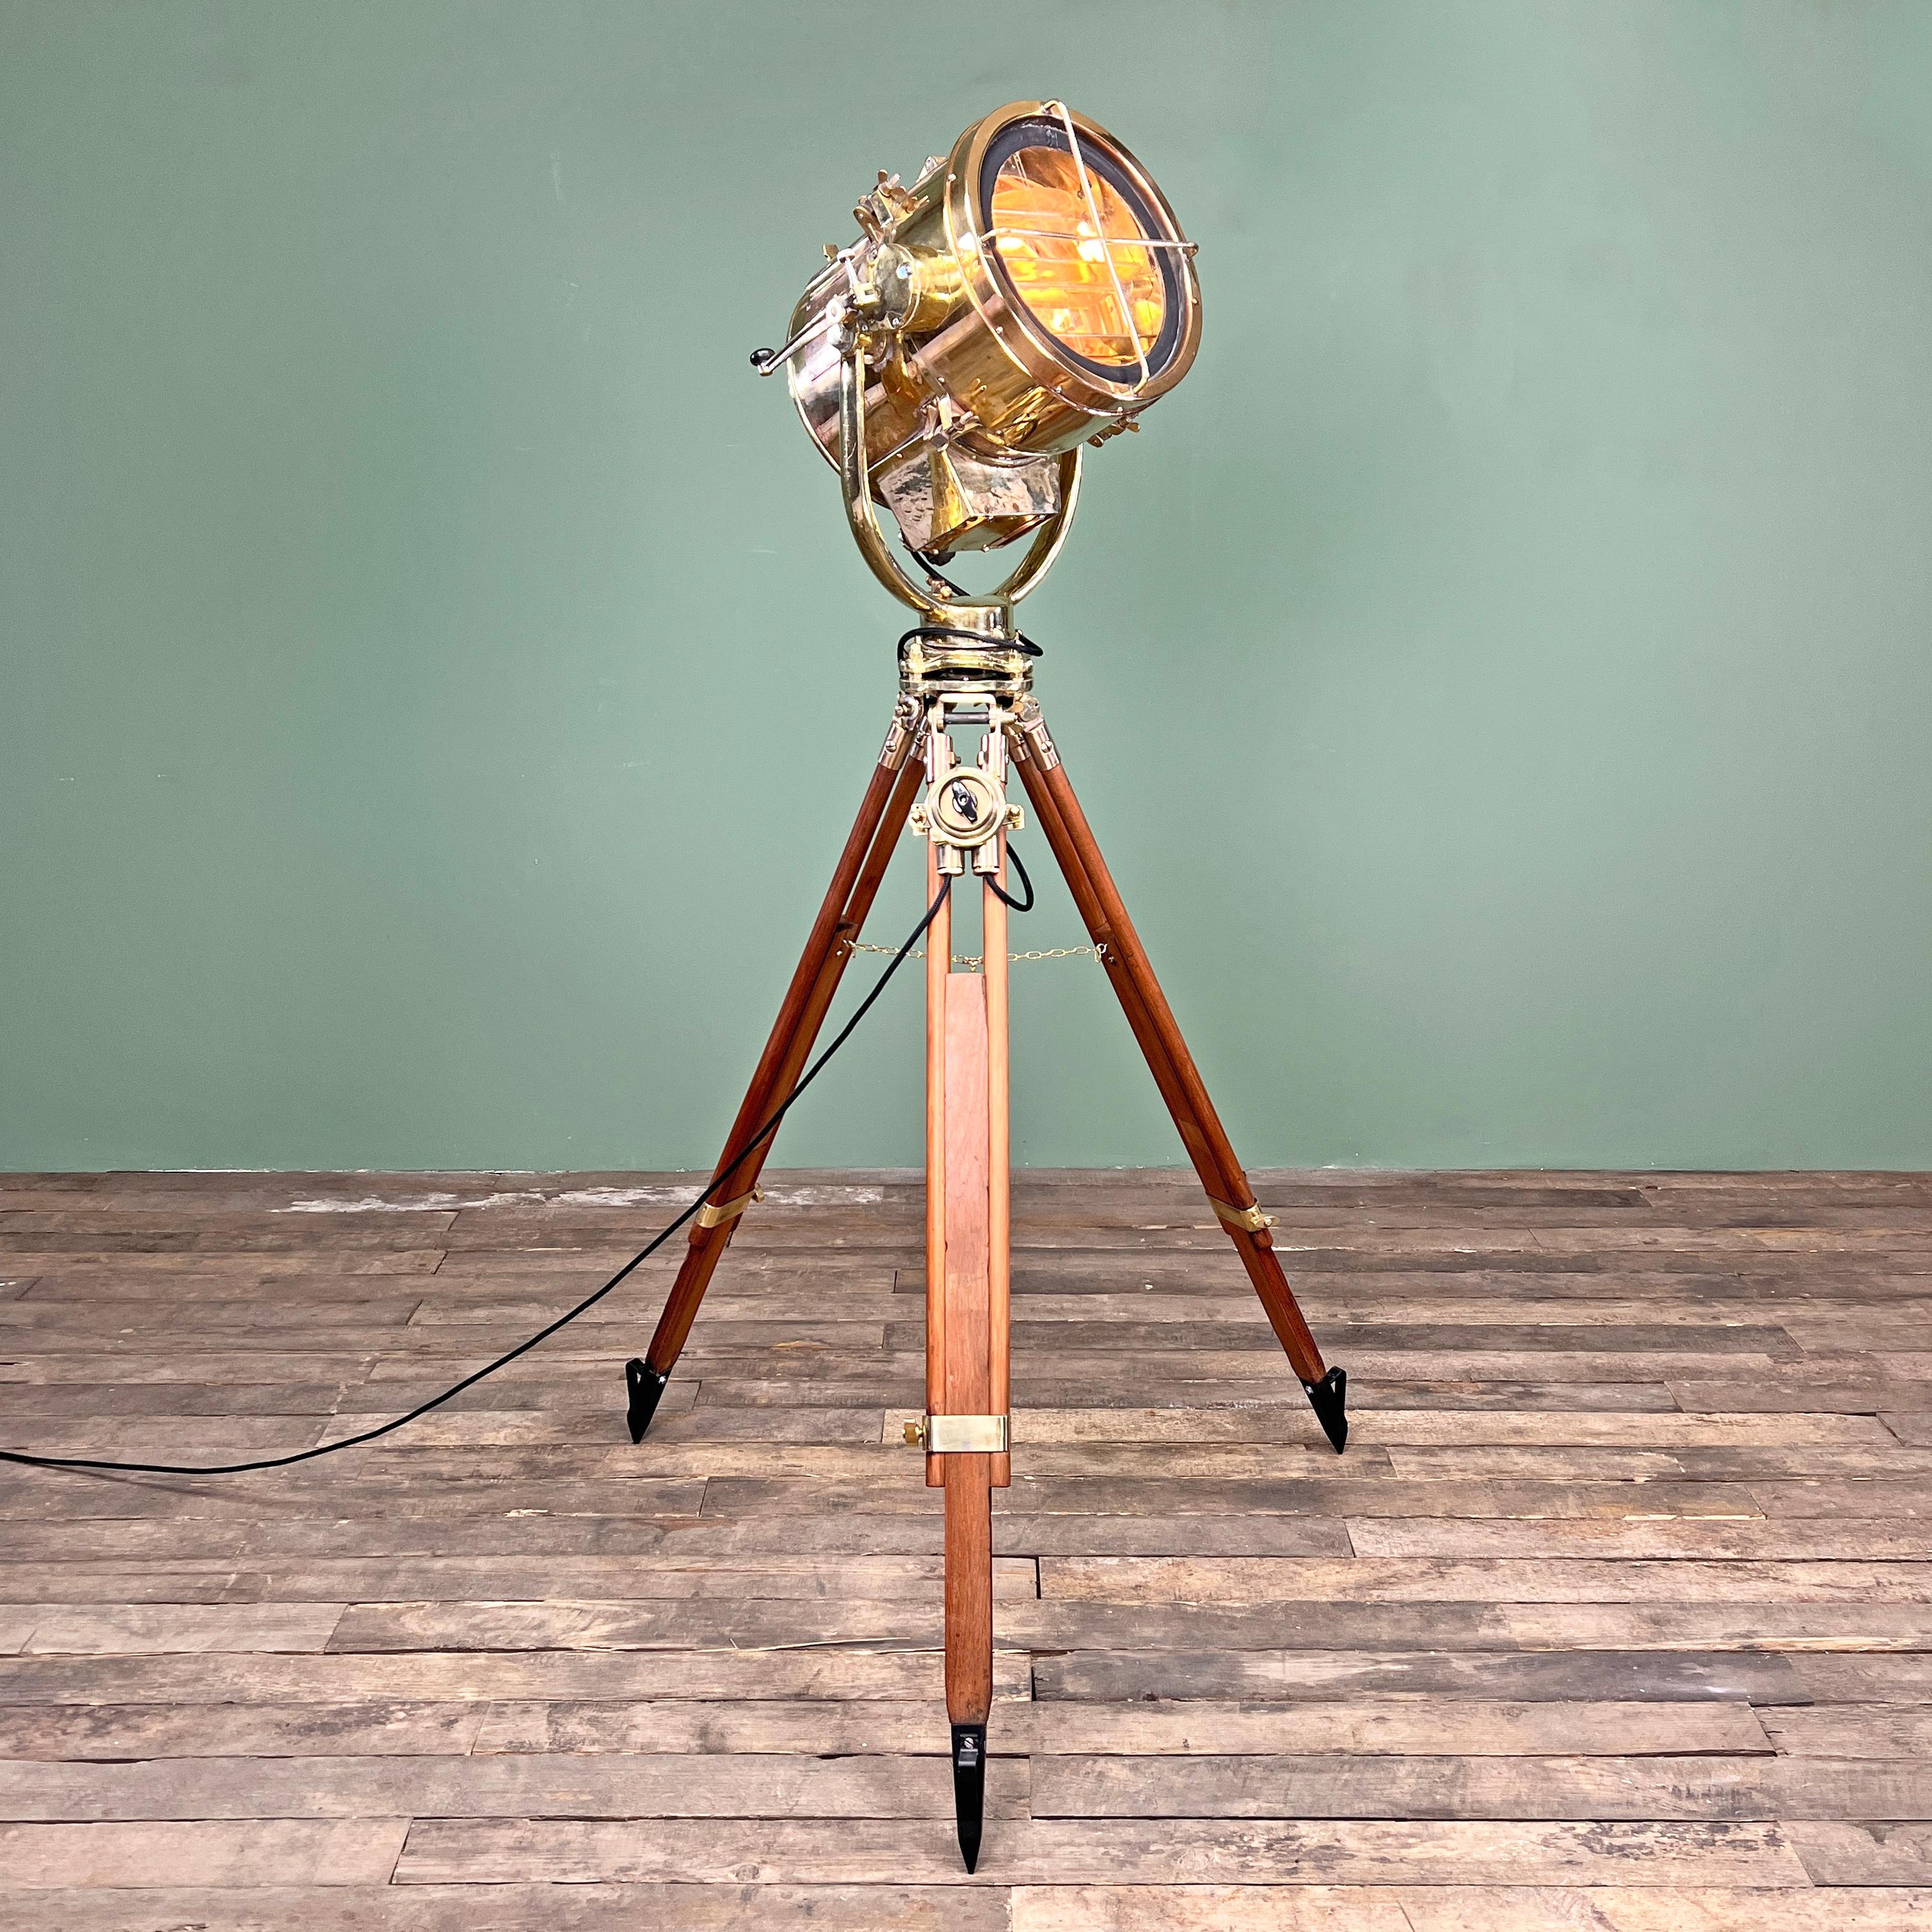 This brass daylight signal lamp is reclaimed from Navy ships where it was used as a morse code light to send messages between ships. Manufactured in 1984 by the Japanese company Shonan Kosakusho, it is fully functioning and professionally restored.